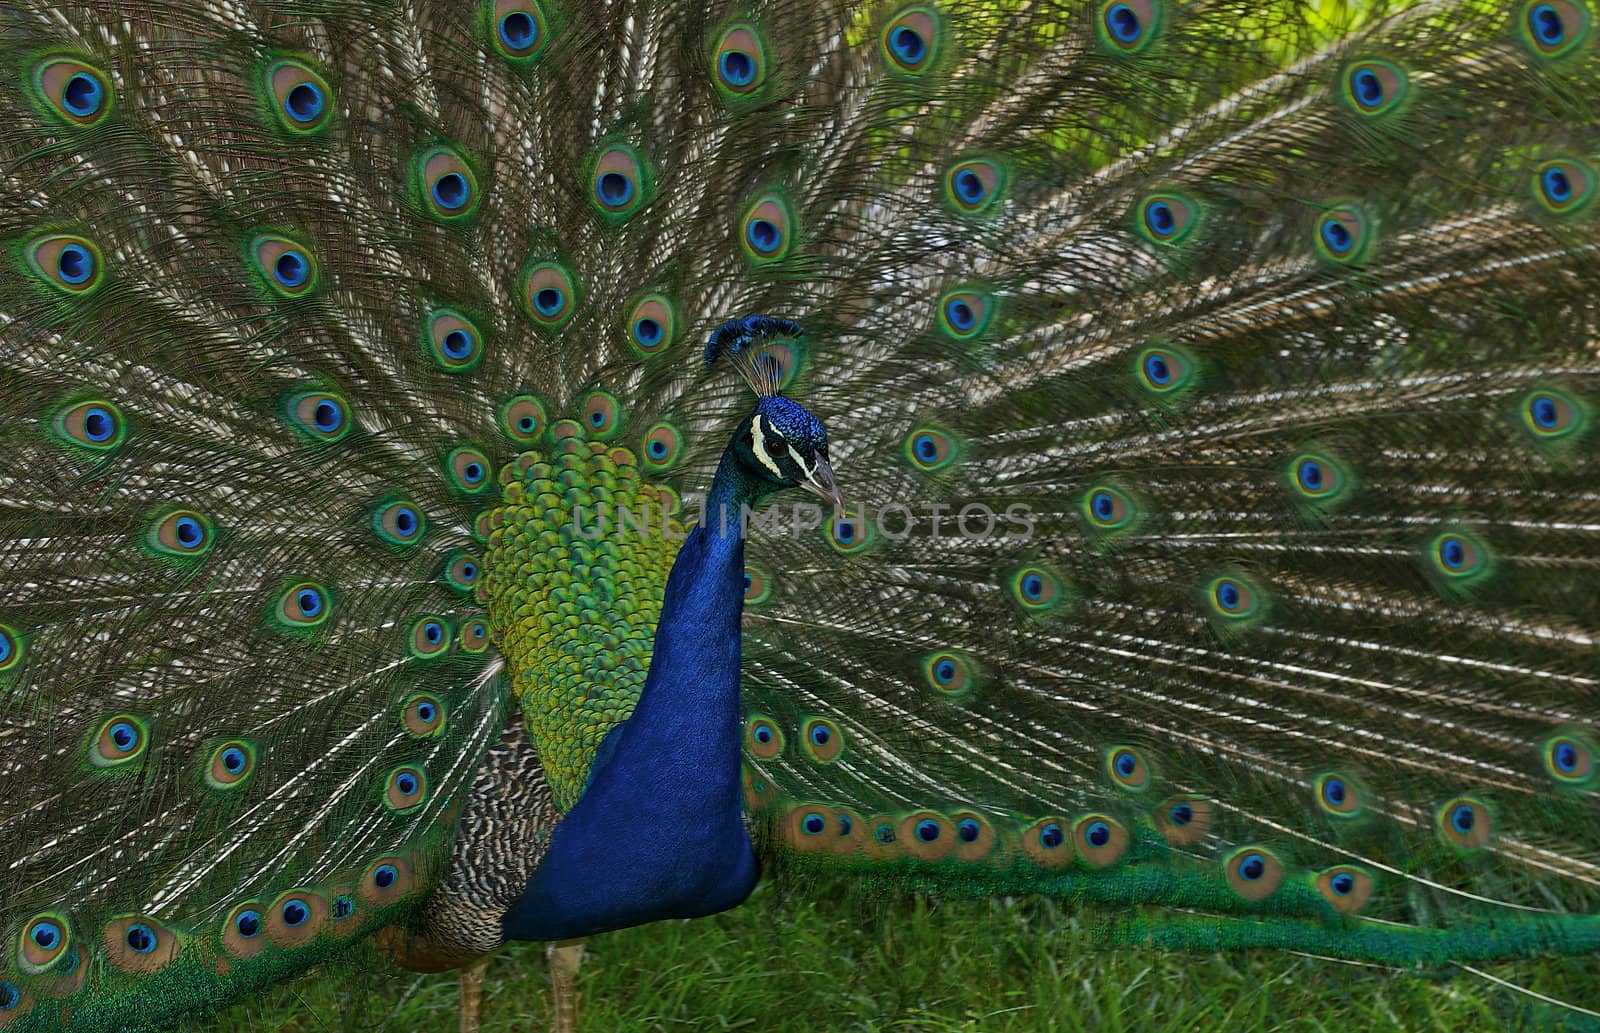 Male Peacock with tail feathers spread by dmvphotos